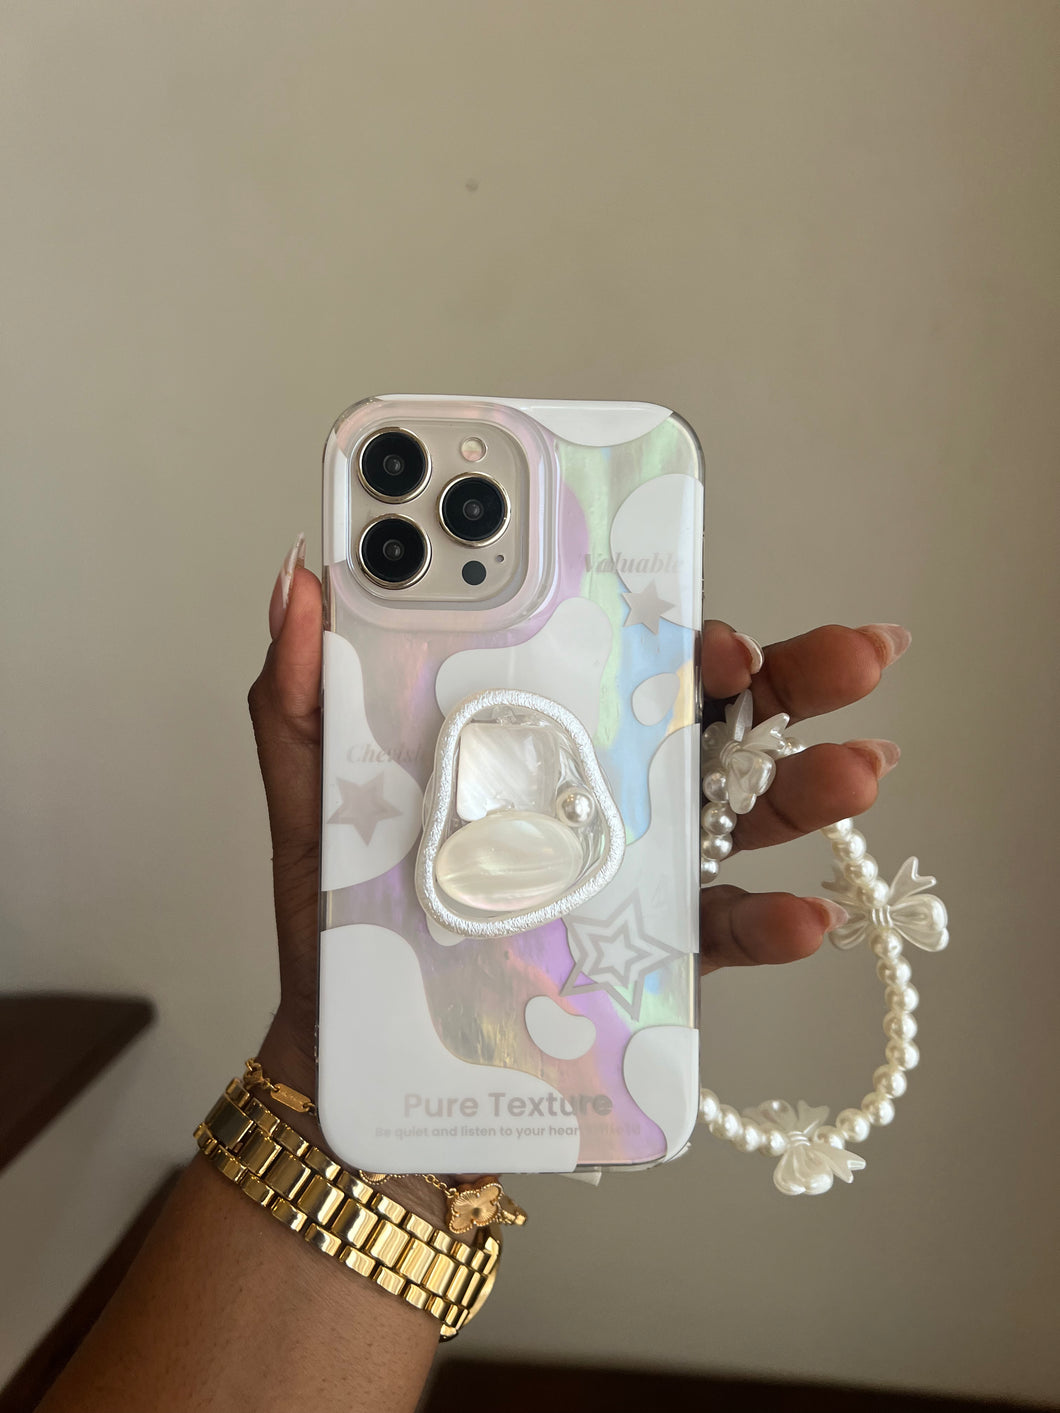 Holographic translucent popsocket case (can be bought with or without the charm holder) it’ll